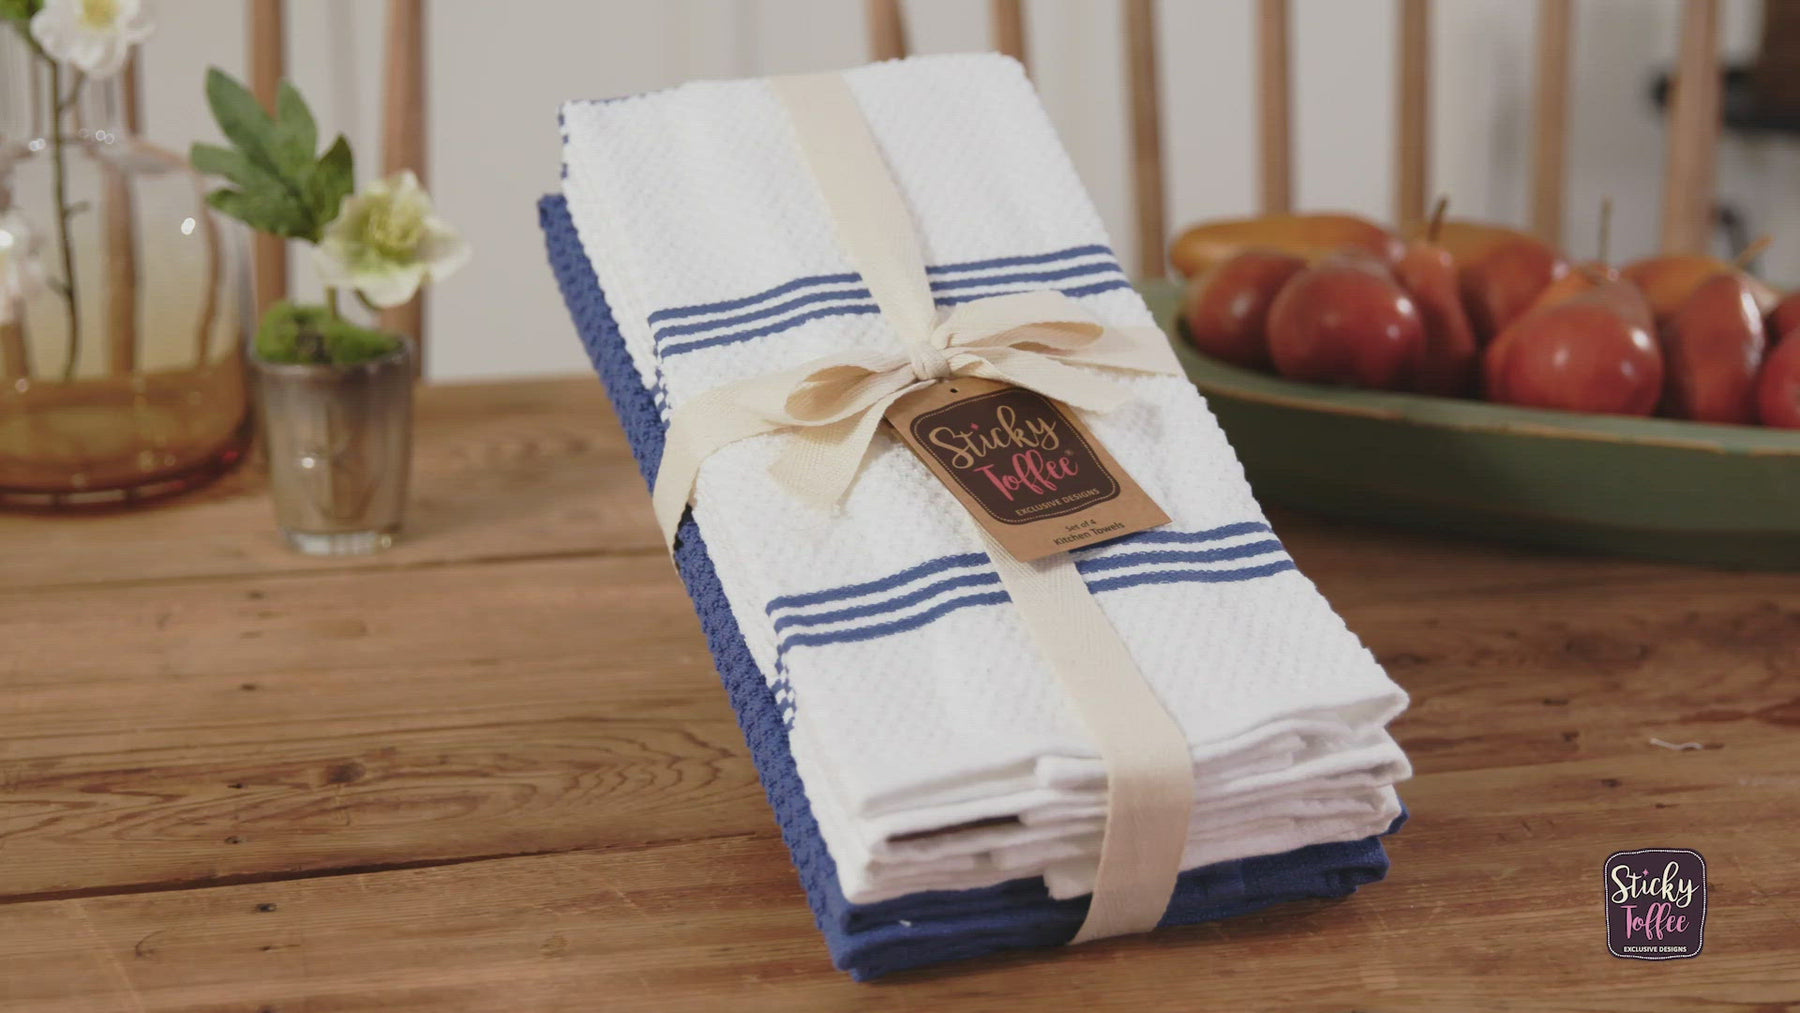 Sticky Toffee Kitchen Towels Dish Towels 100% Cotton, Set of 4, Gray and  White Hand Towels, Tea Towels, Reusable Absorbent Cleaning Cloths, 28 in x  16